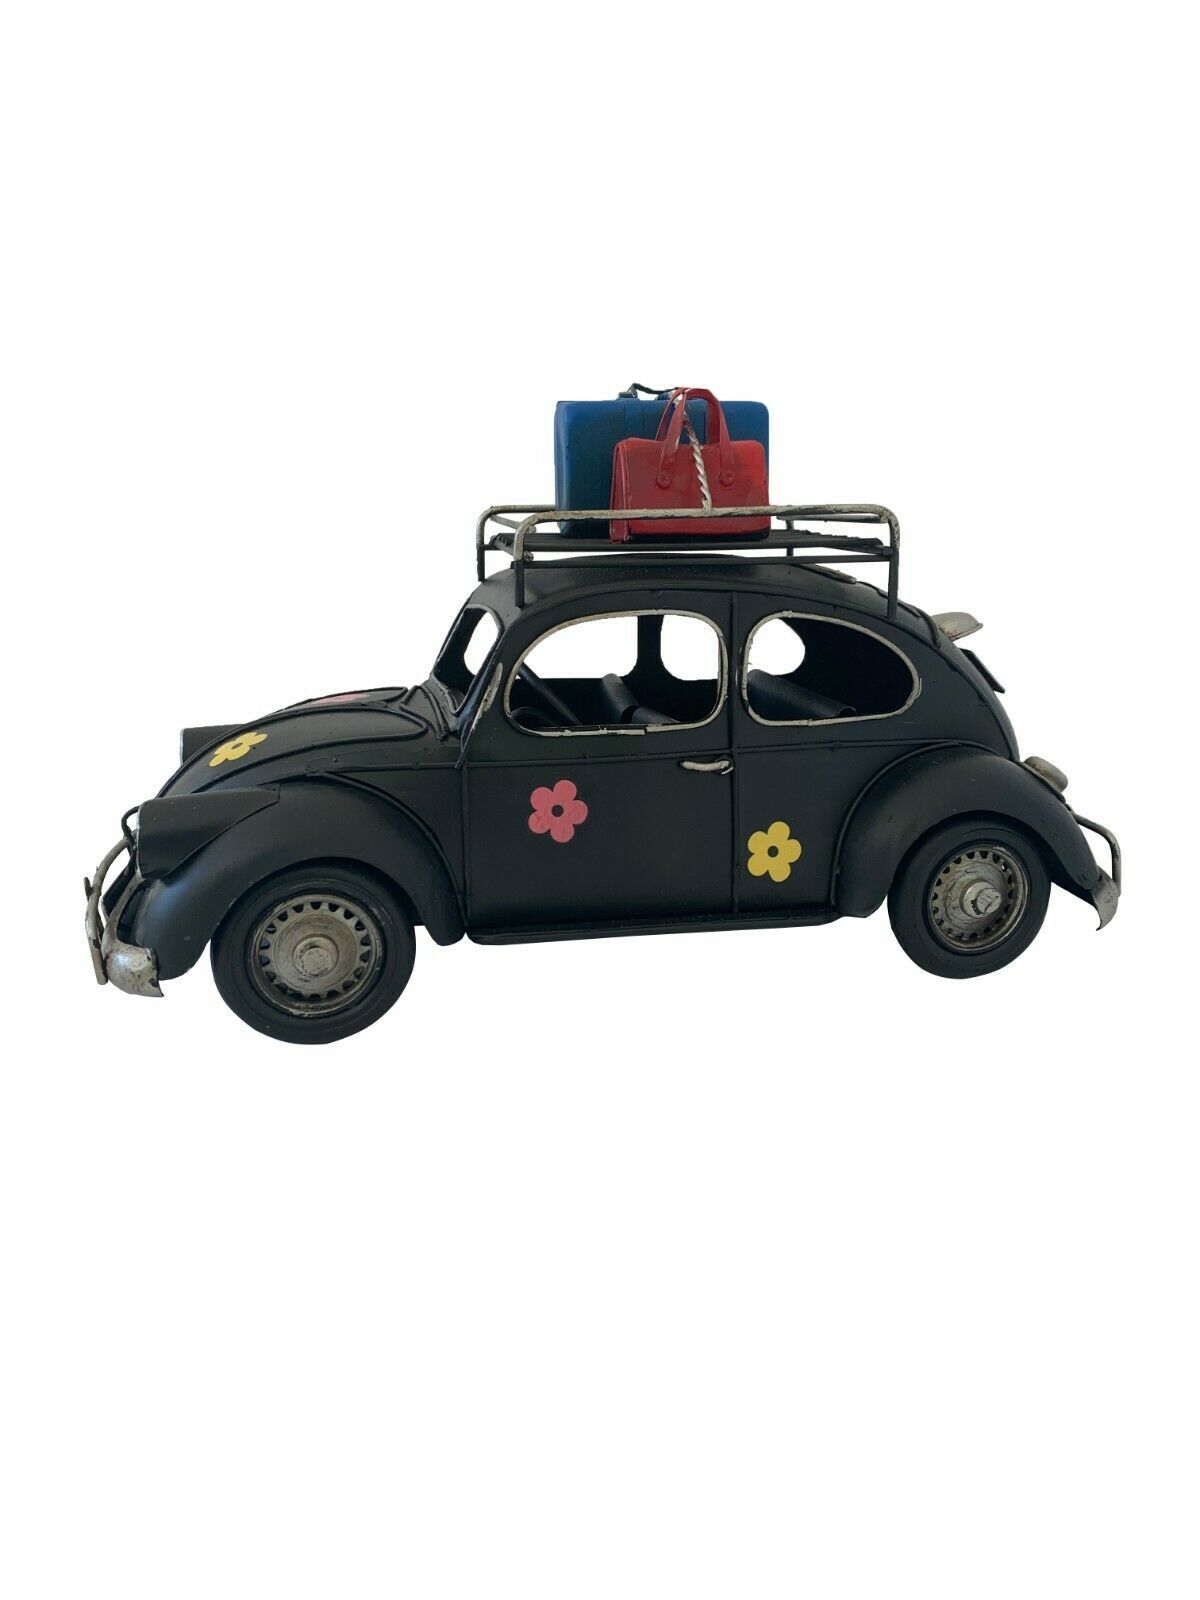 Herbie Beetle Antique Car Toy Pull Back Diecast Model Vehicle Toys for Boys Gift